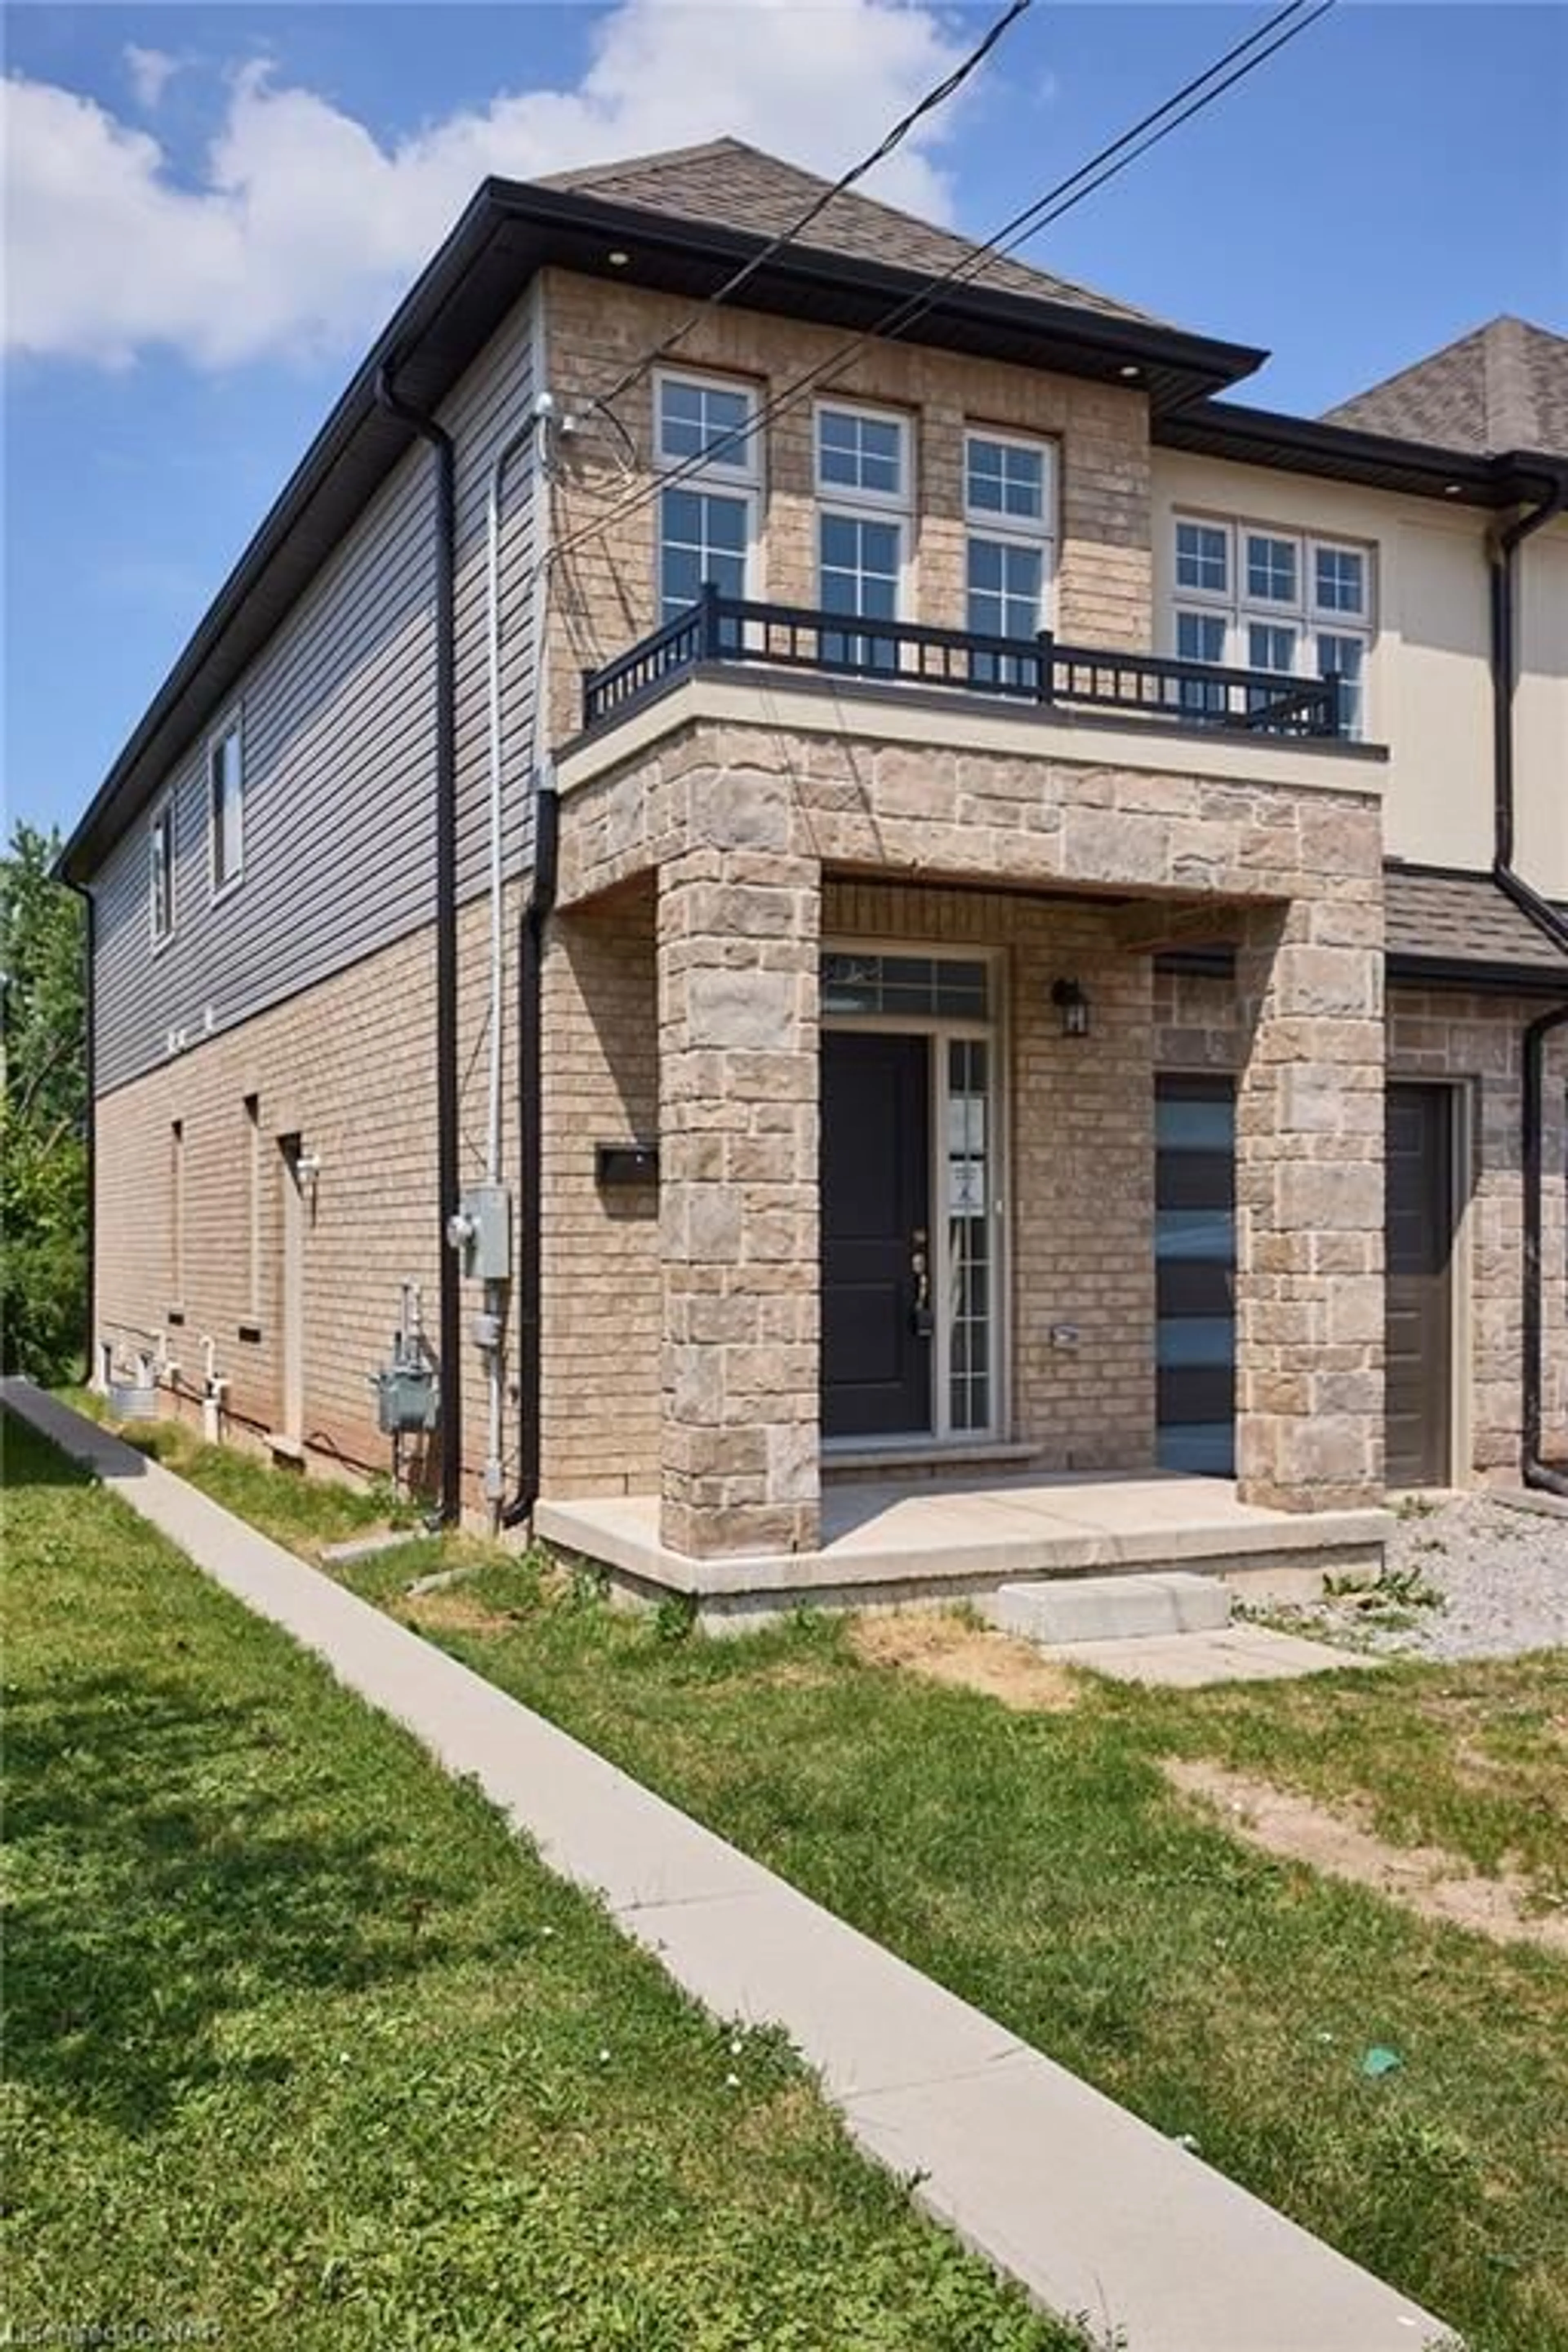 Home with brick exterior material for 185 Federal St, Stoney Creek Ontario L8E 1N8